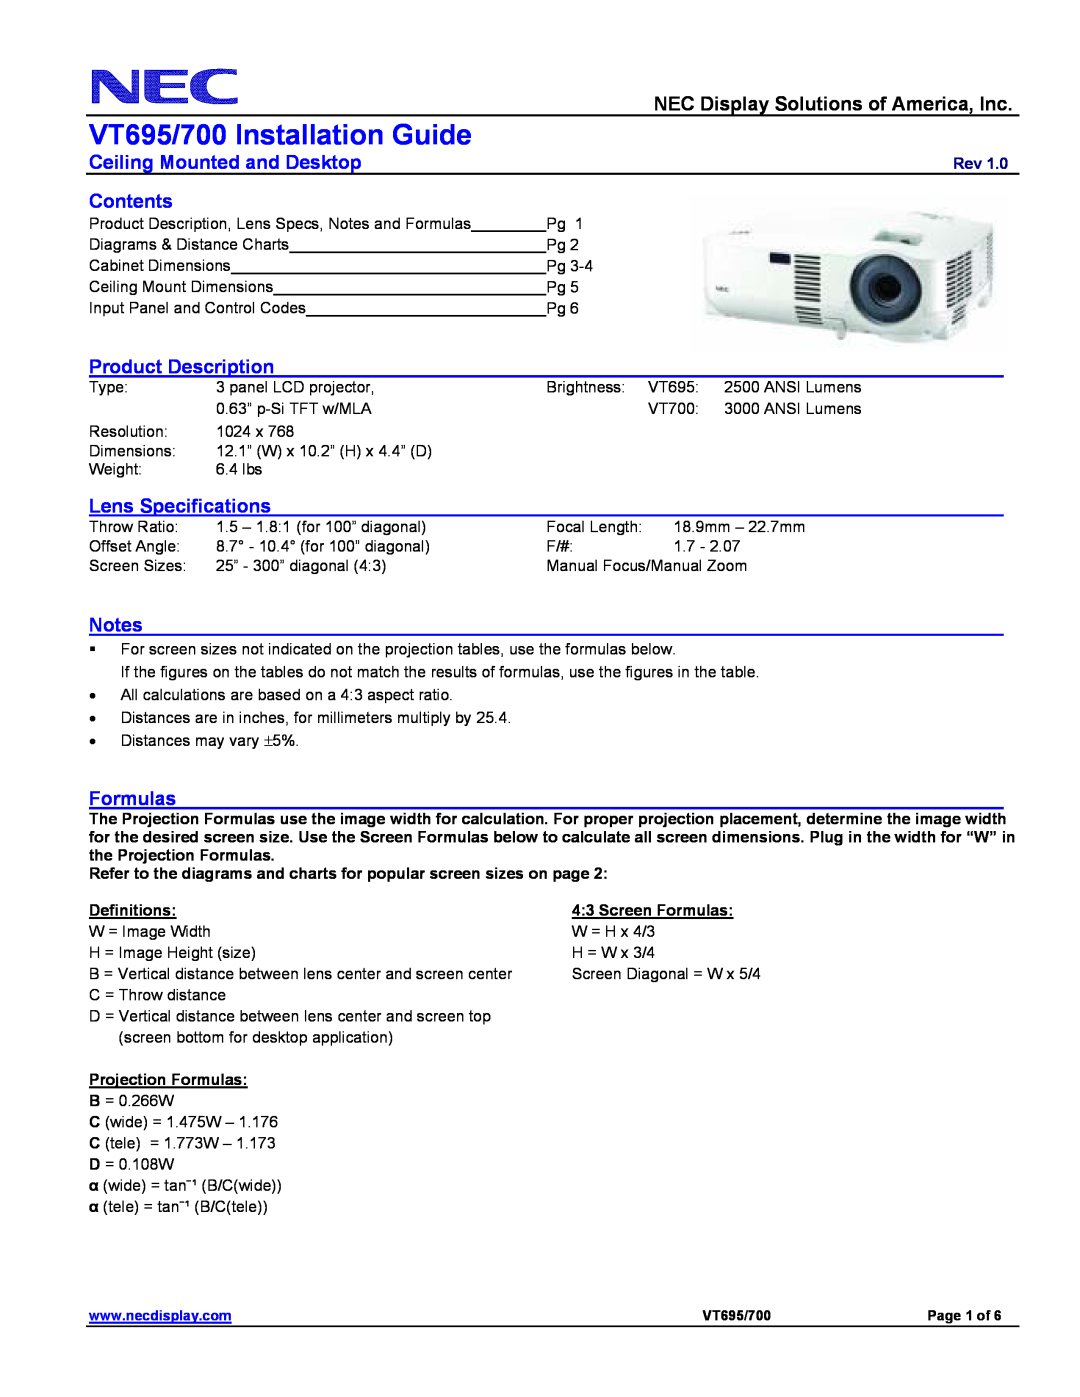 NEC specifications VT695/700 Installation Guide, NEC Display Solutions of America, Inc, Ceiling Mounted and Desktop 